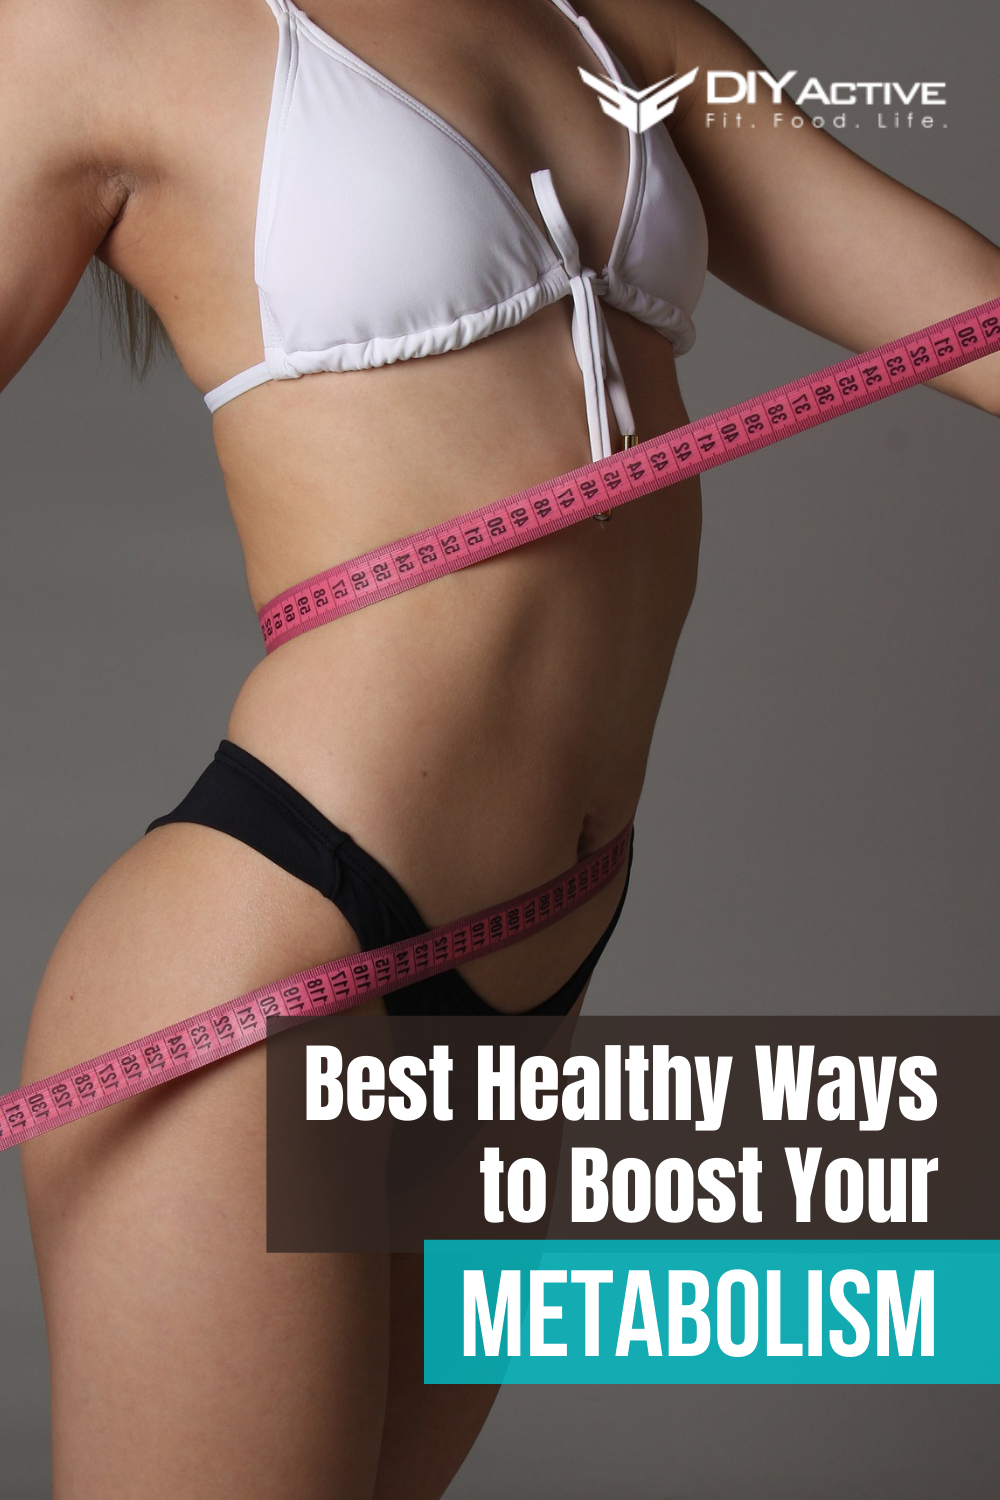 Best Healthy Ways to Boost Your Metabolism